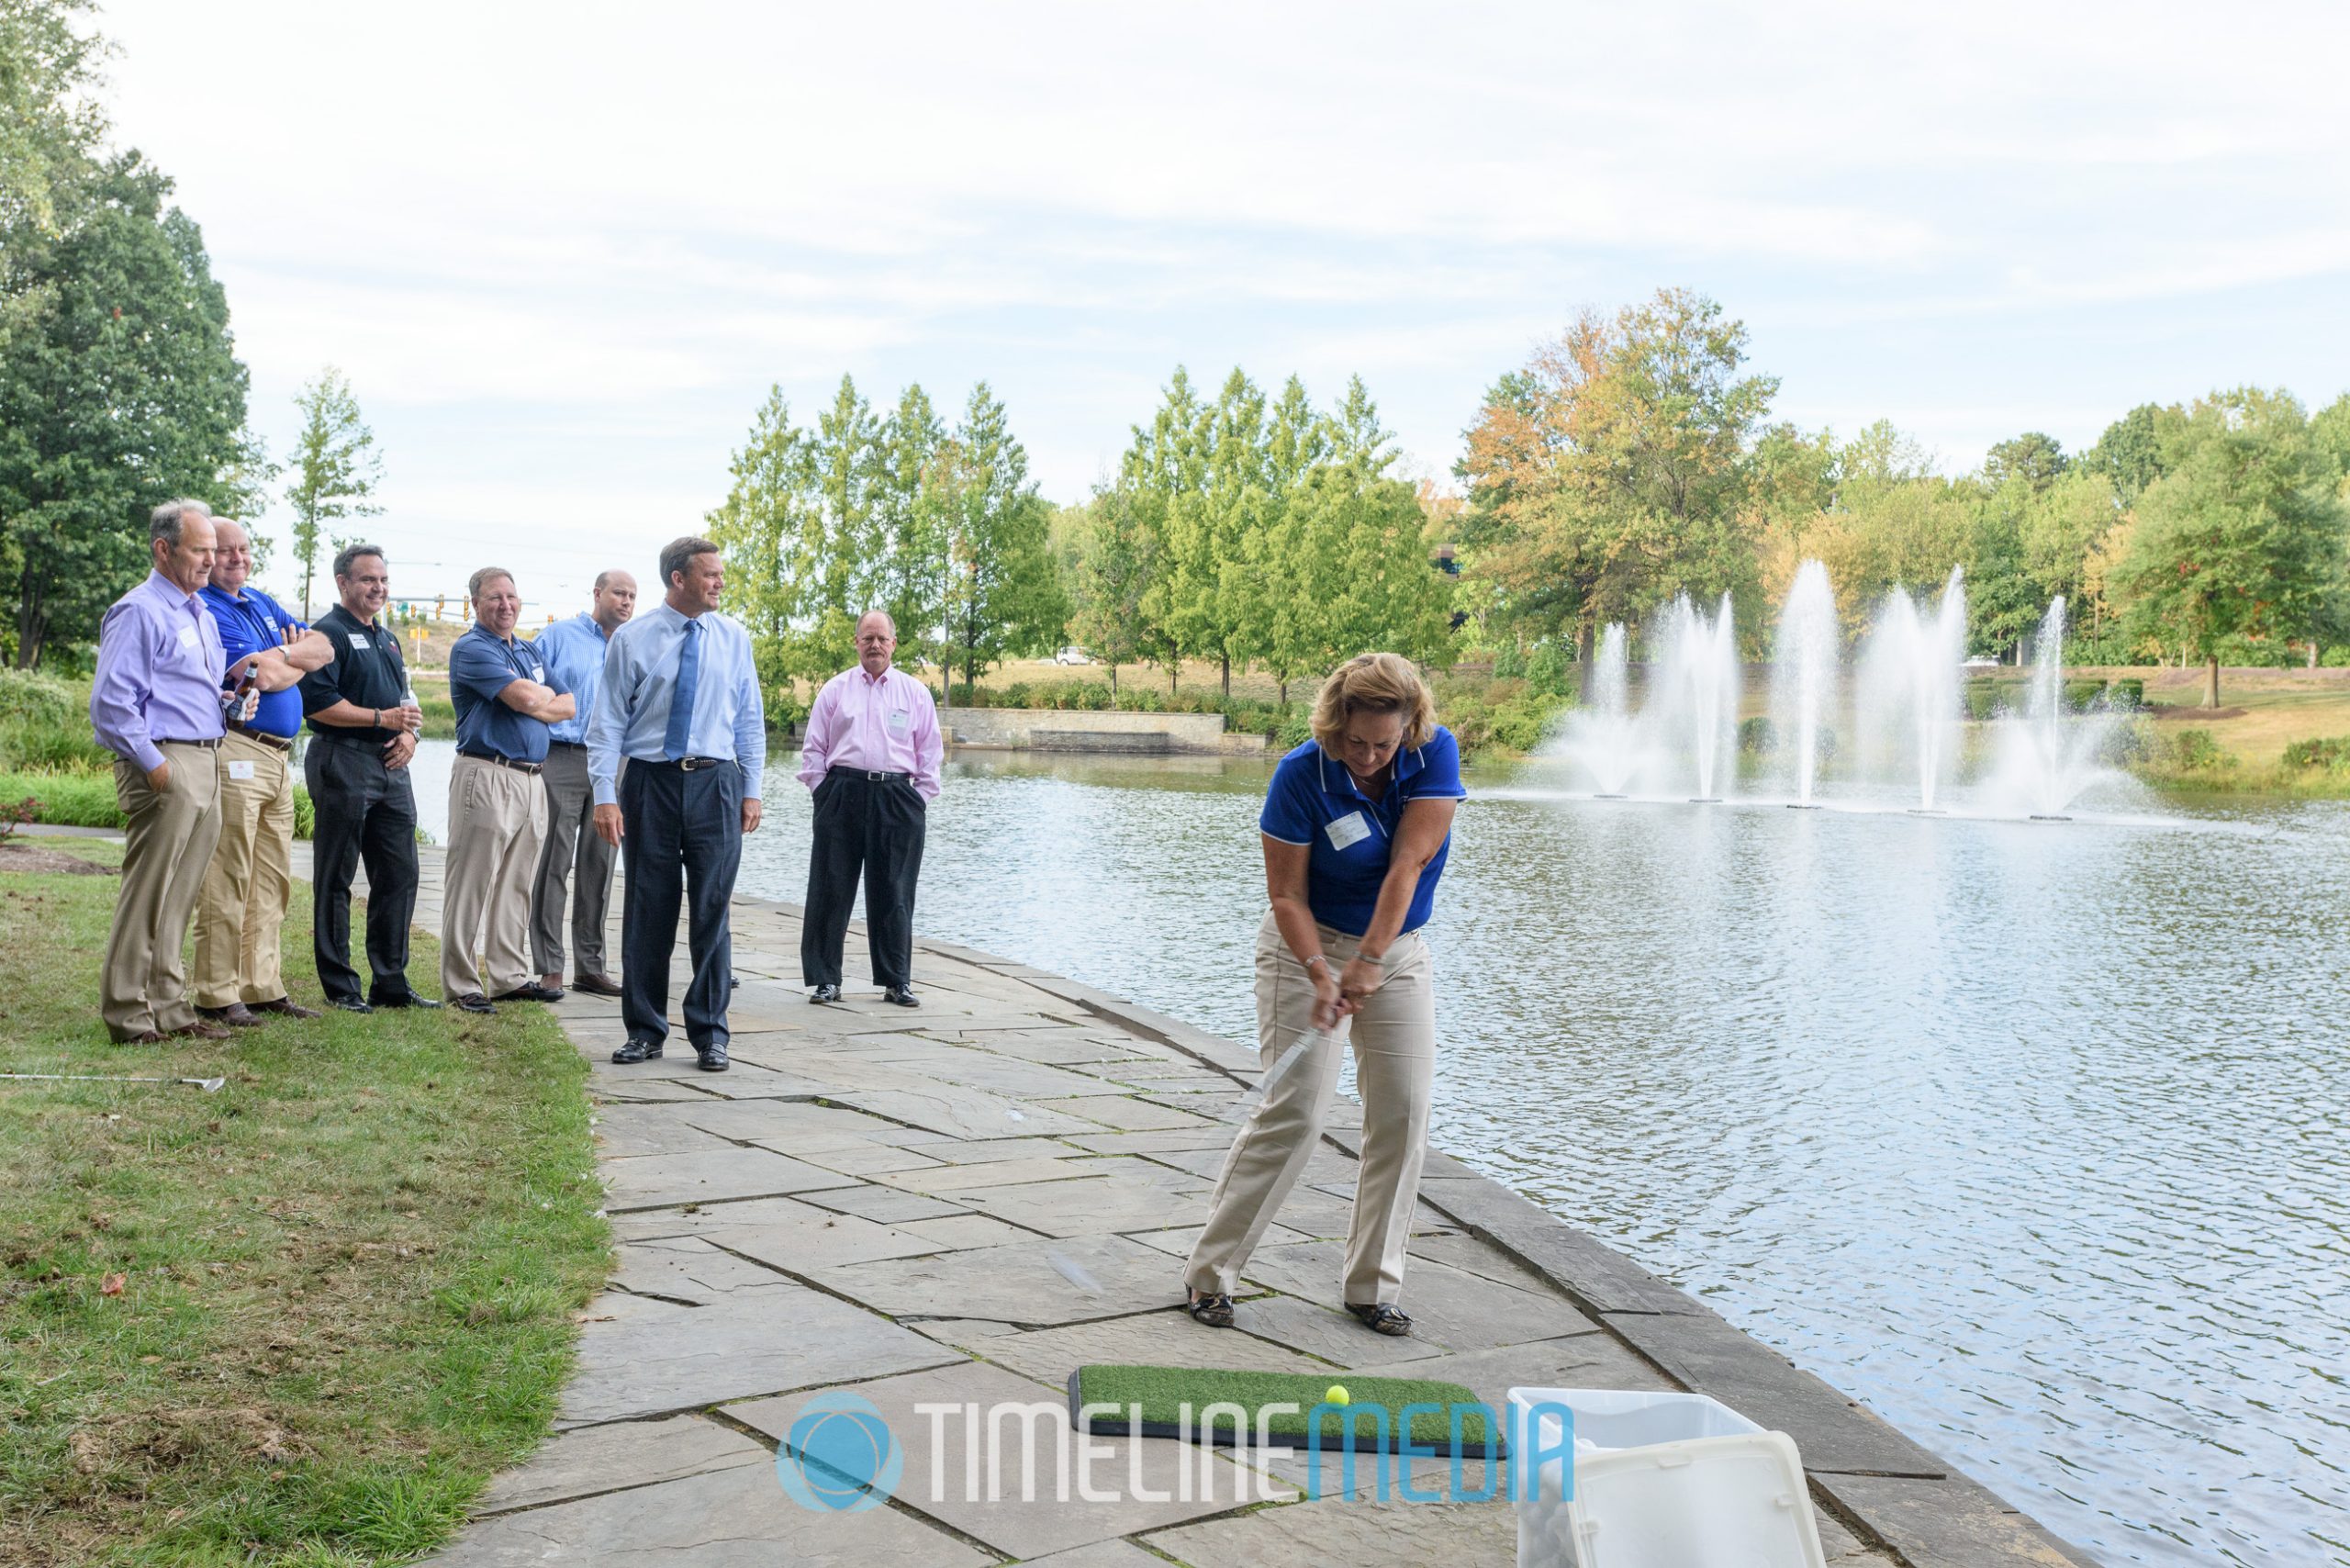 Golf ball driving practice at Peterson Companies HQ ©TimeLine Media